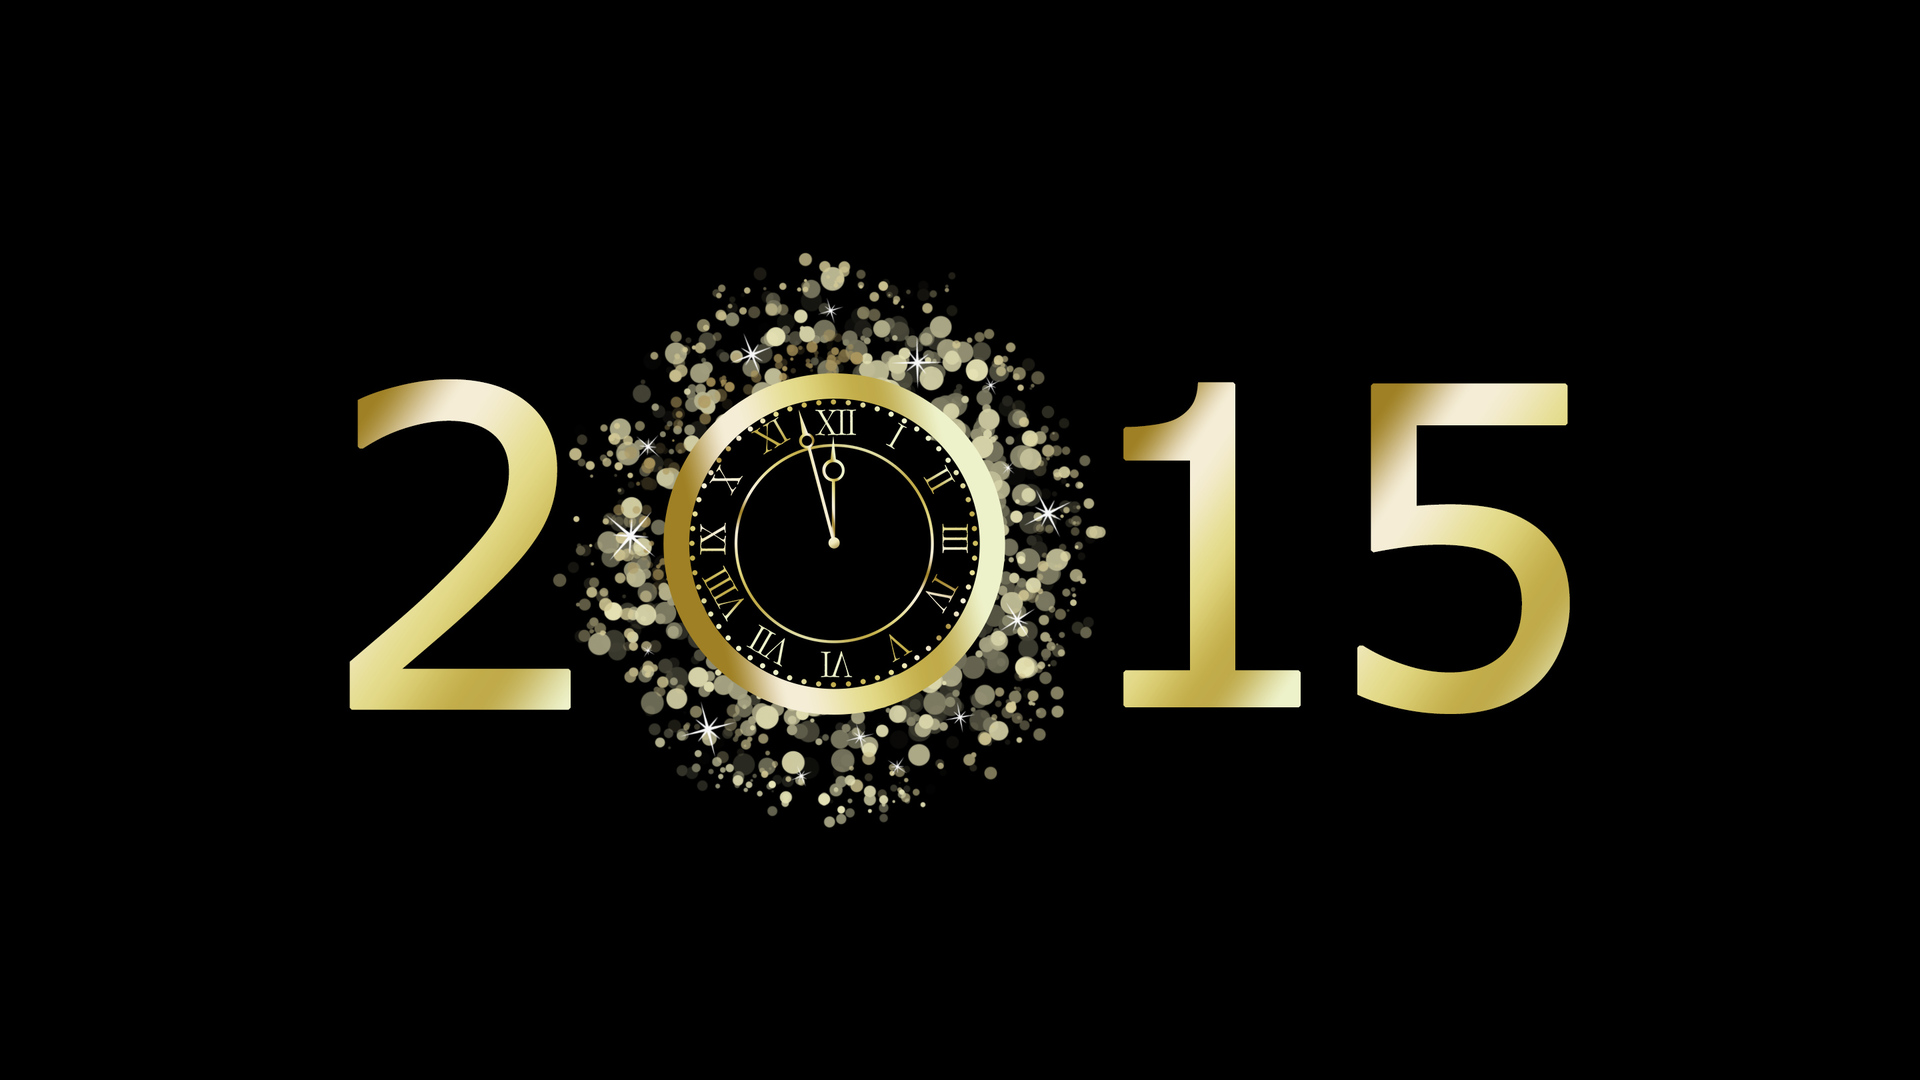 New Years Wallpaper Widescreen On